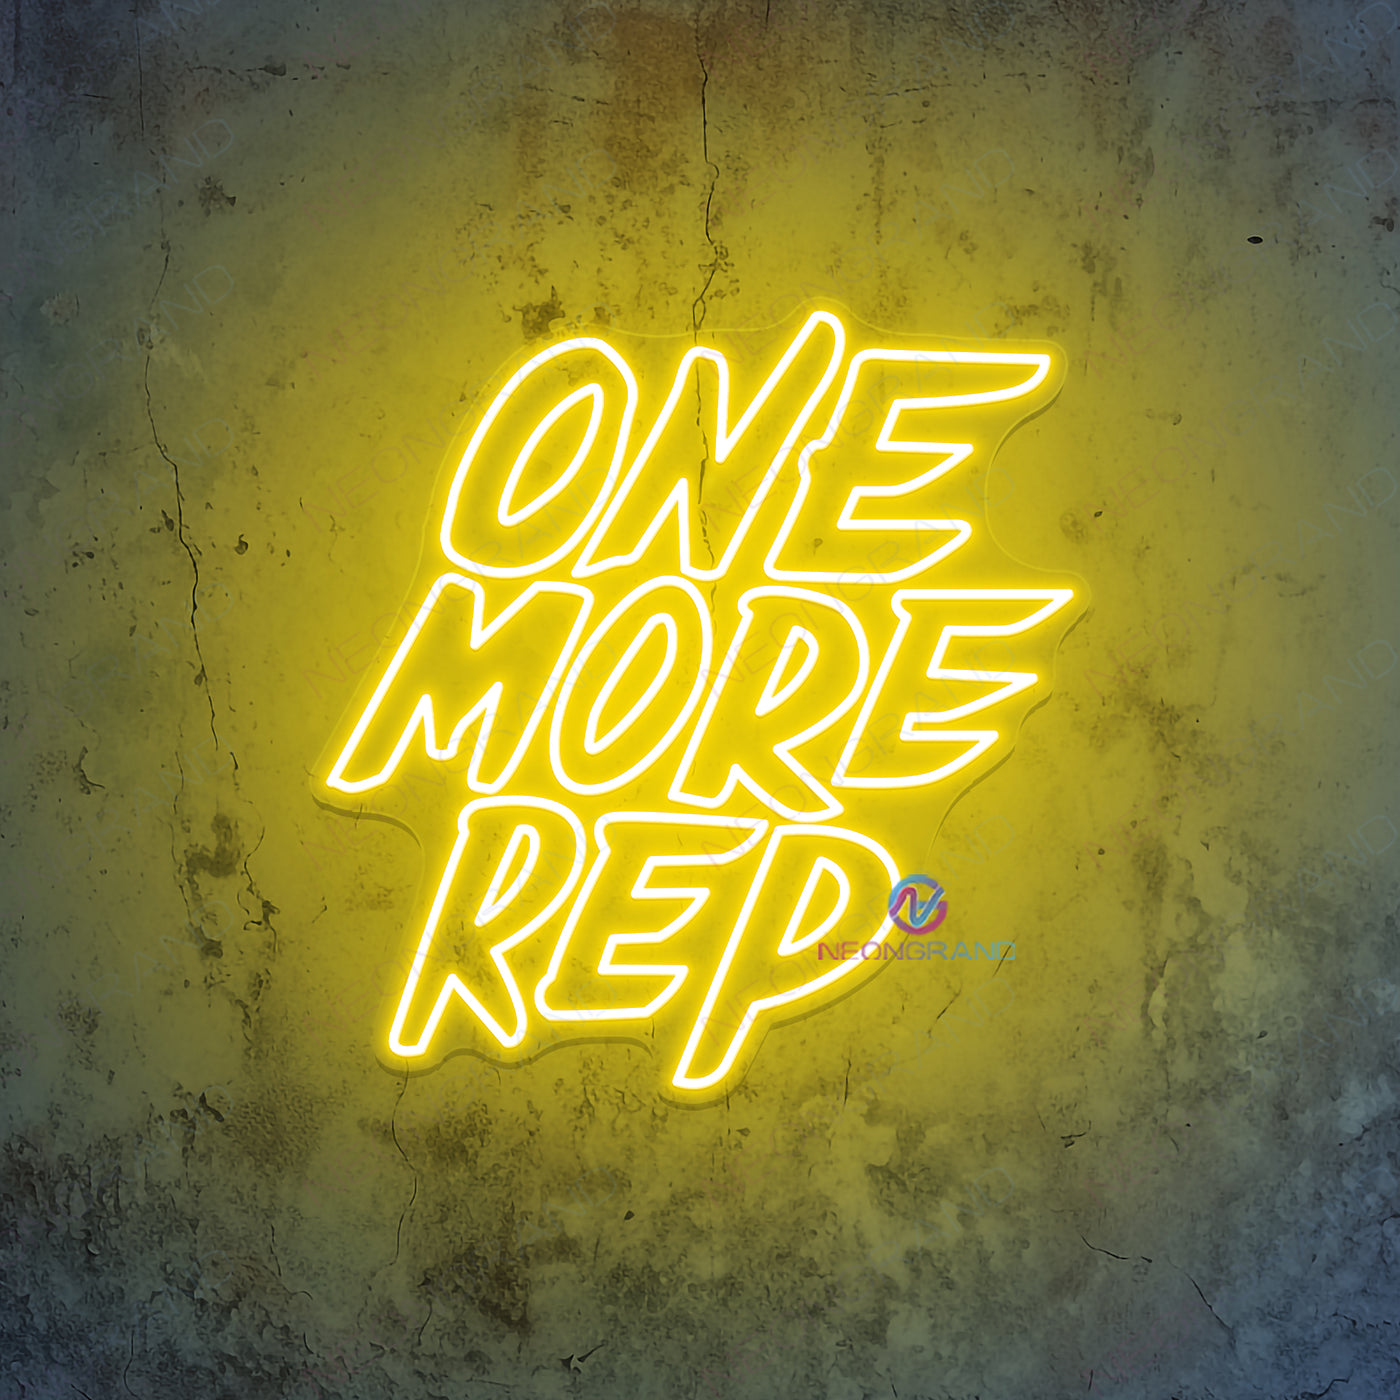 One More Rep Neon Sign Gym Led Light